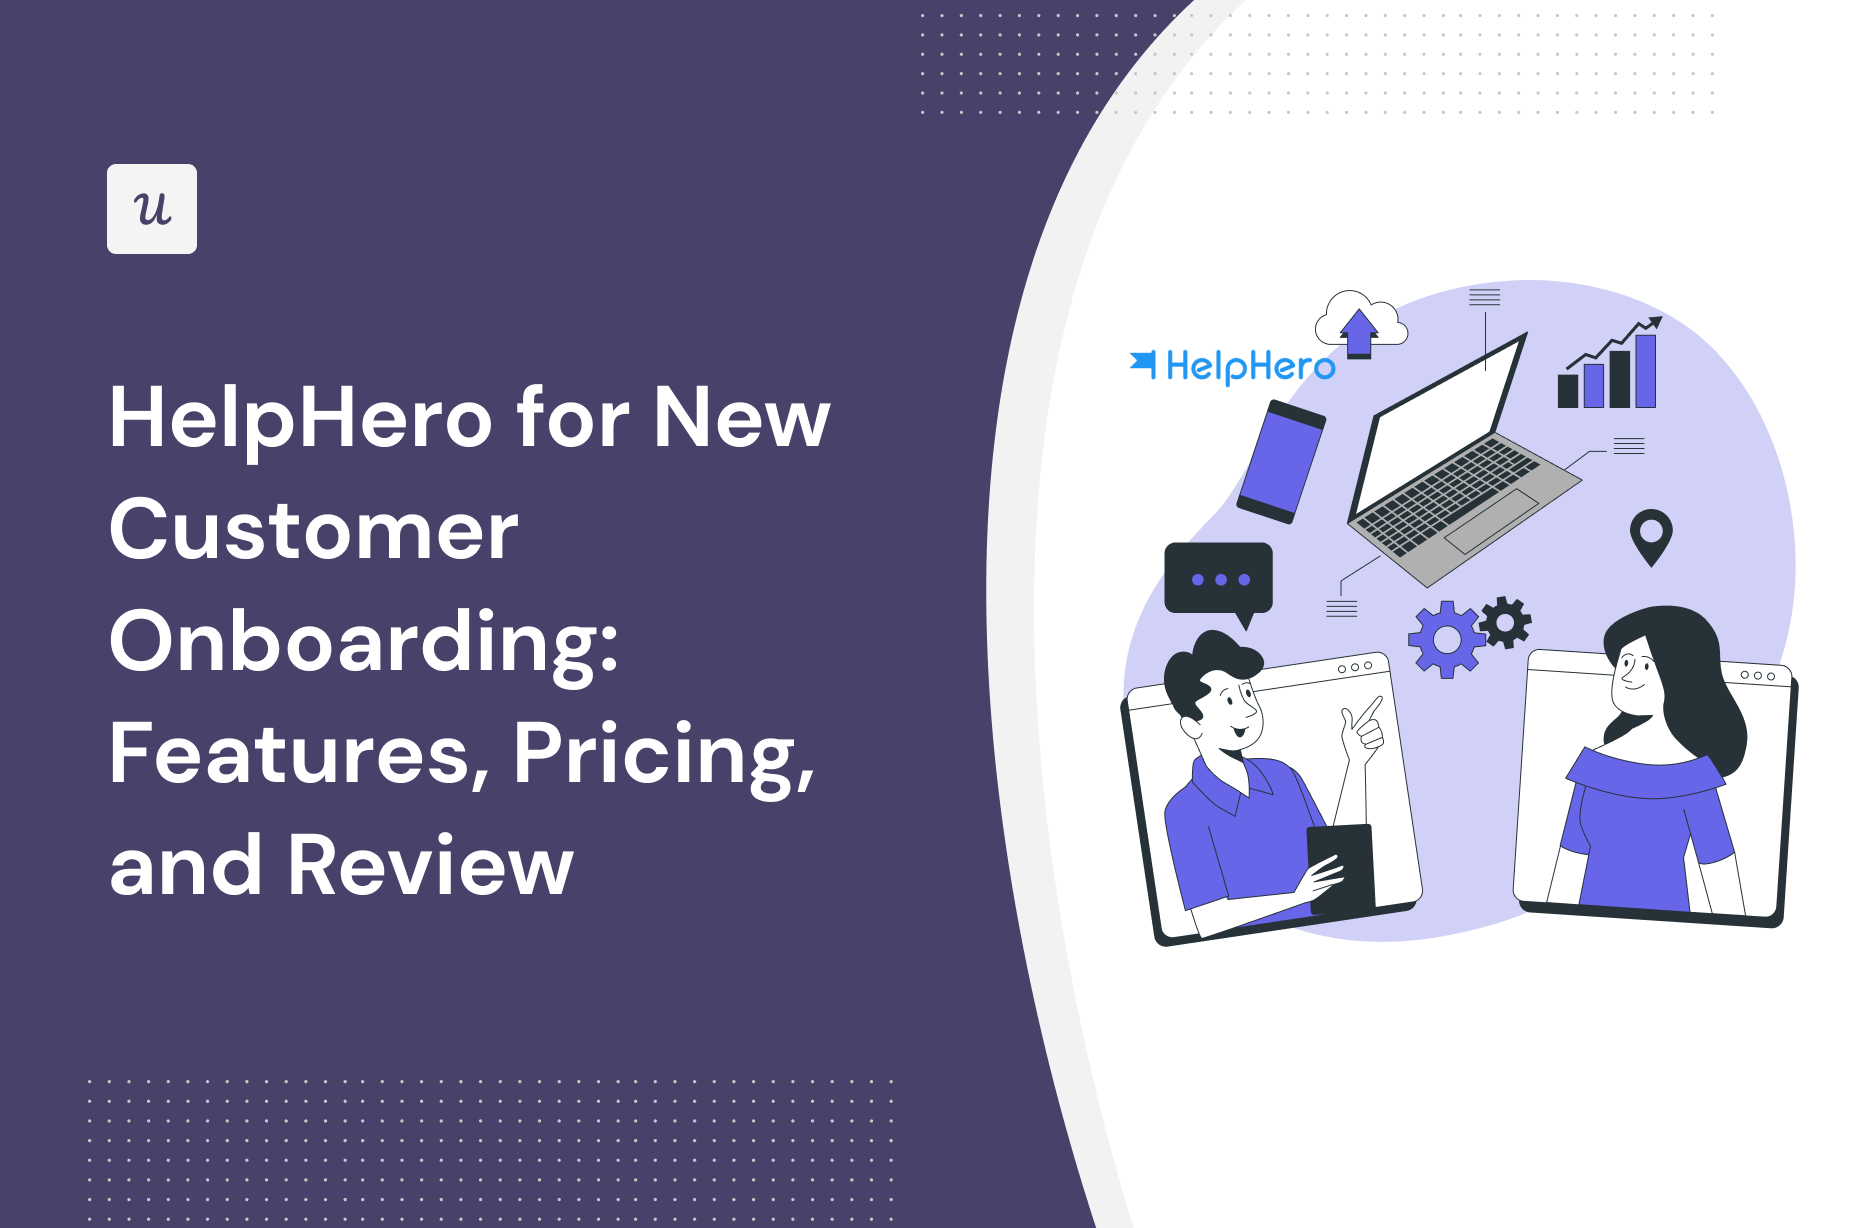 HelpHero for New Customer Onboarding: Features, Pricing, and Review